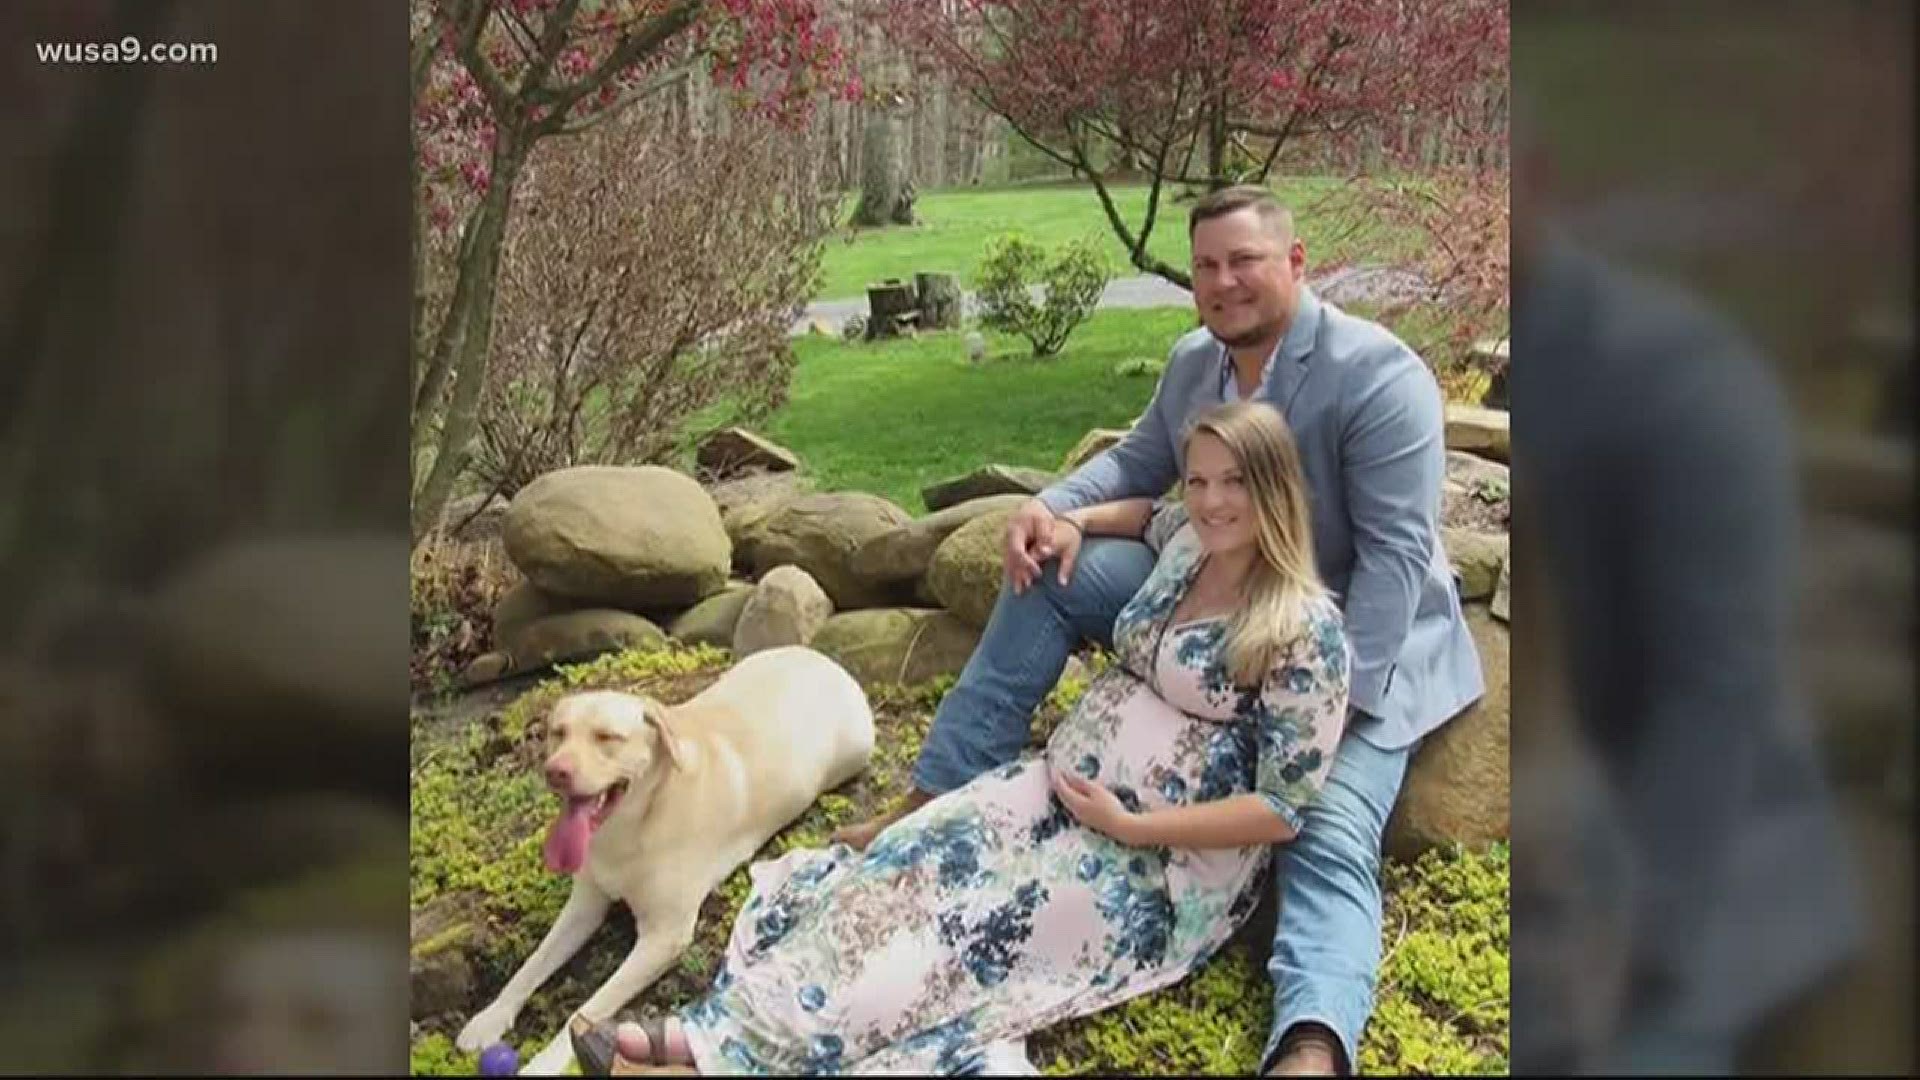 Some federal employees say they can work from home but bosses aren't letting them. One woman quit her job at the VA, saying it wasn't worth risking her baby's health